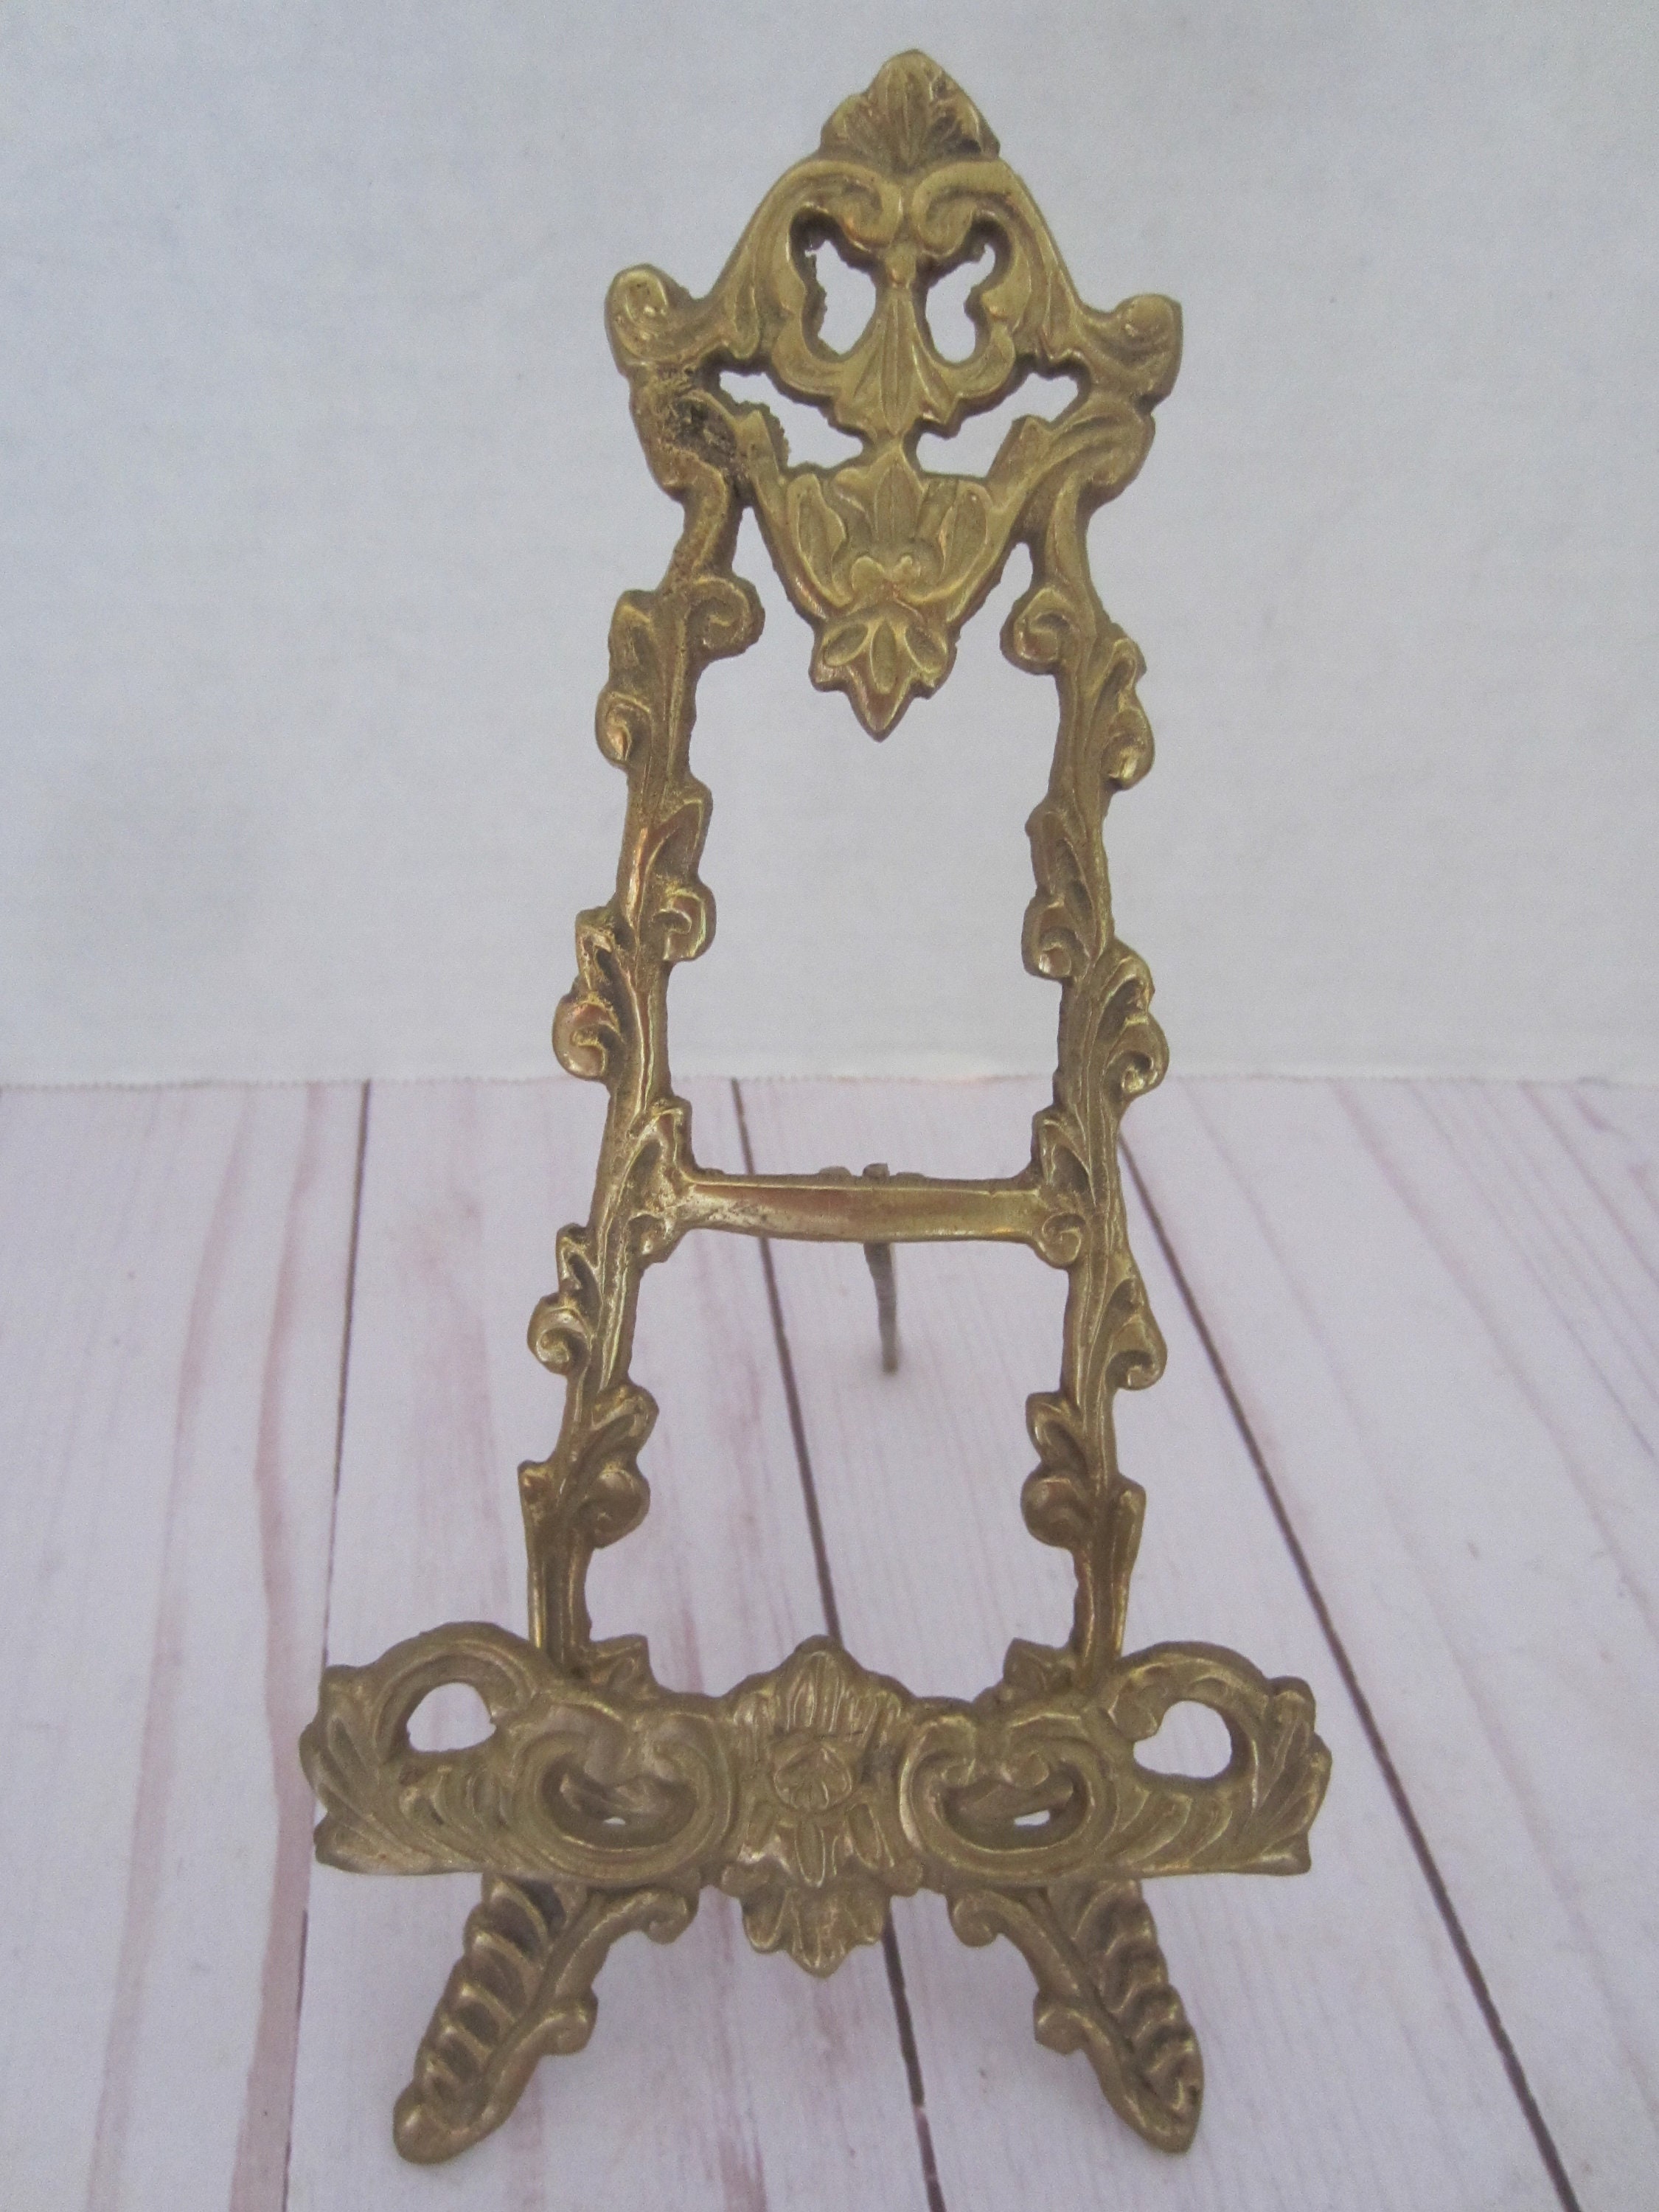 F406 Vintage Gold Tone Picture Frame Holder Stand Collectible Display 